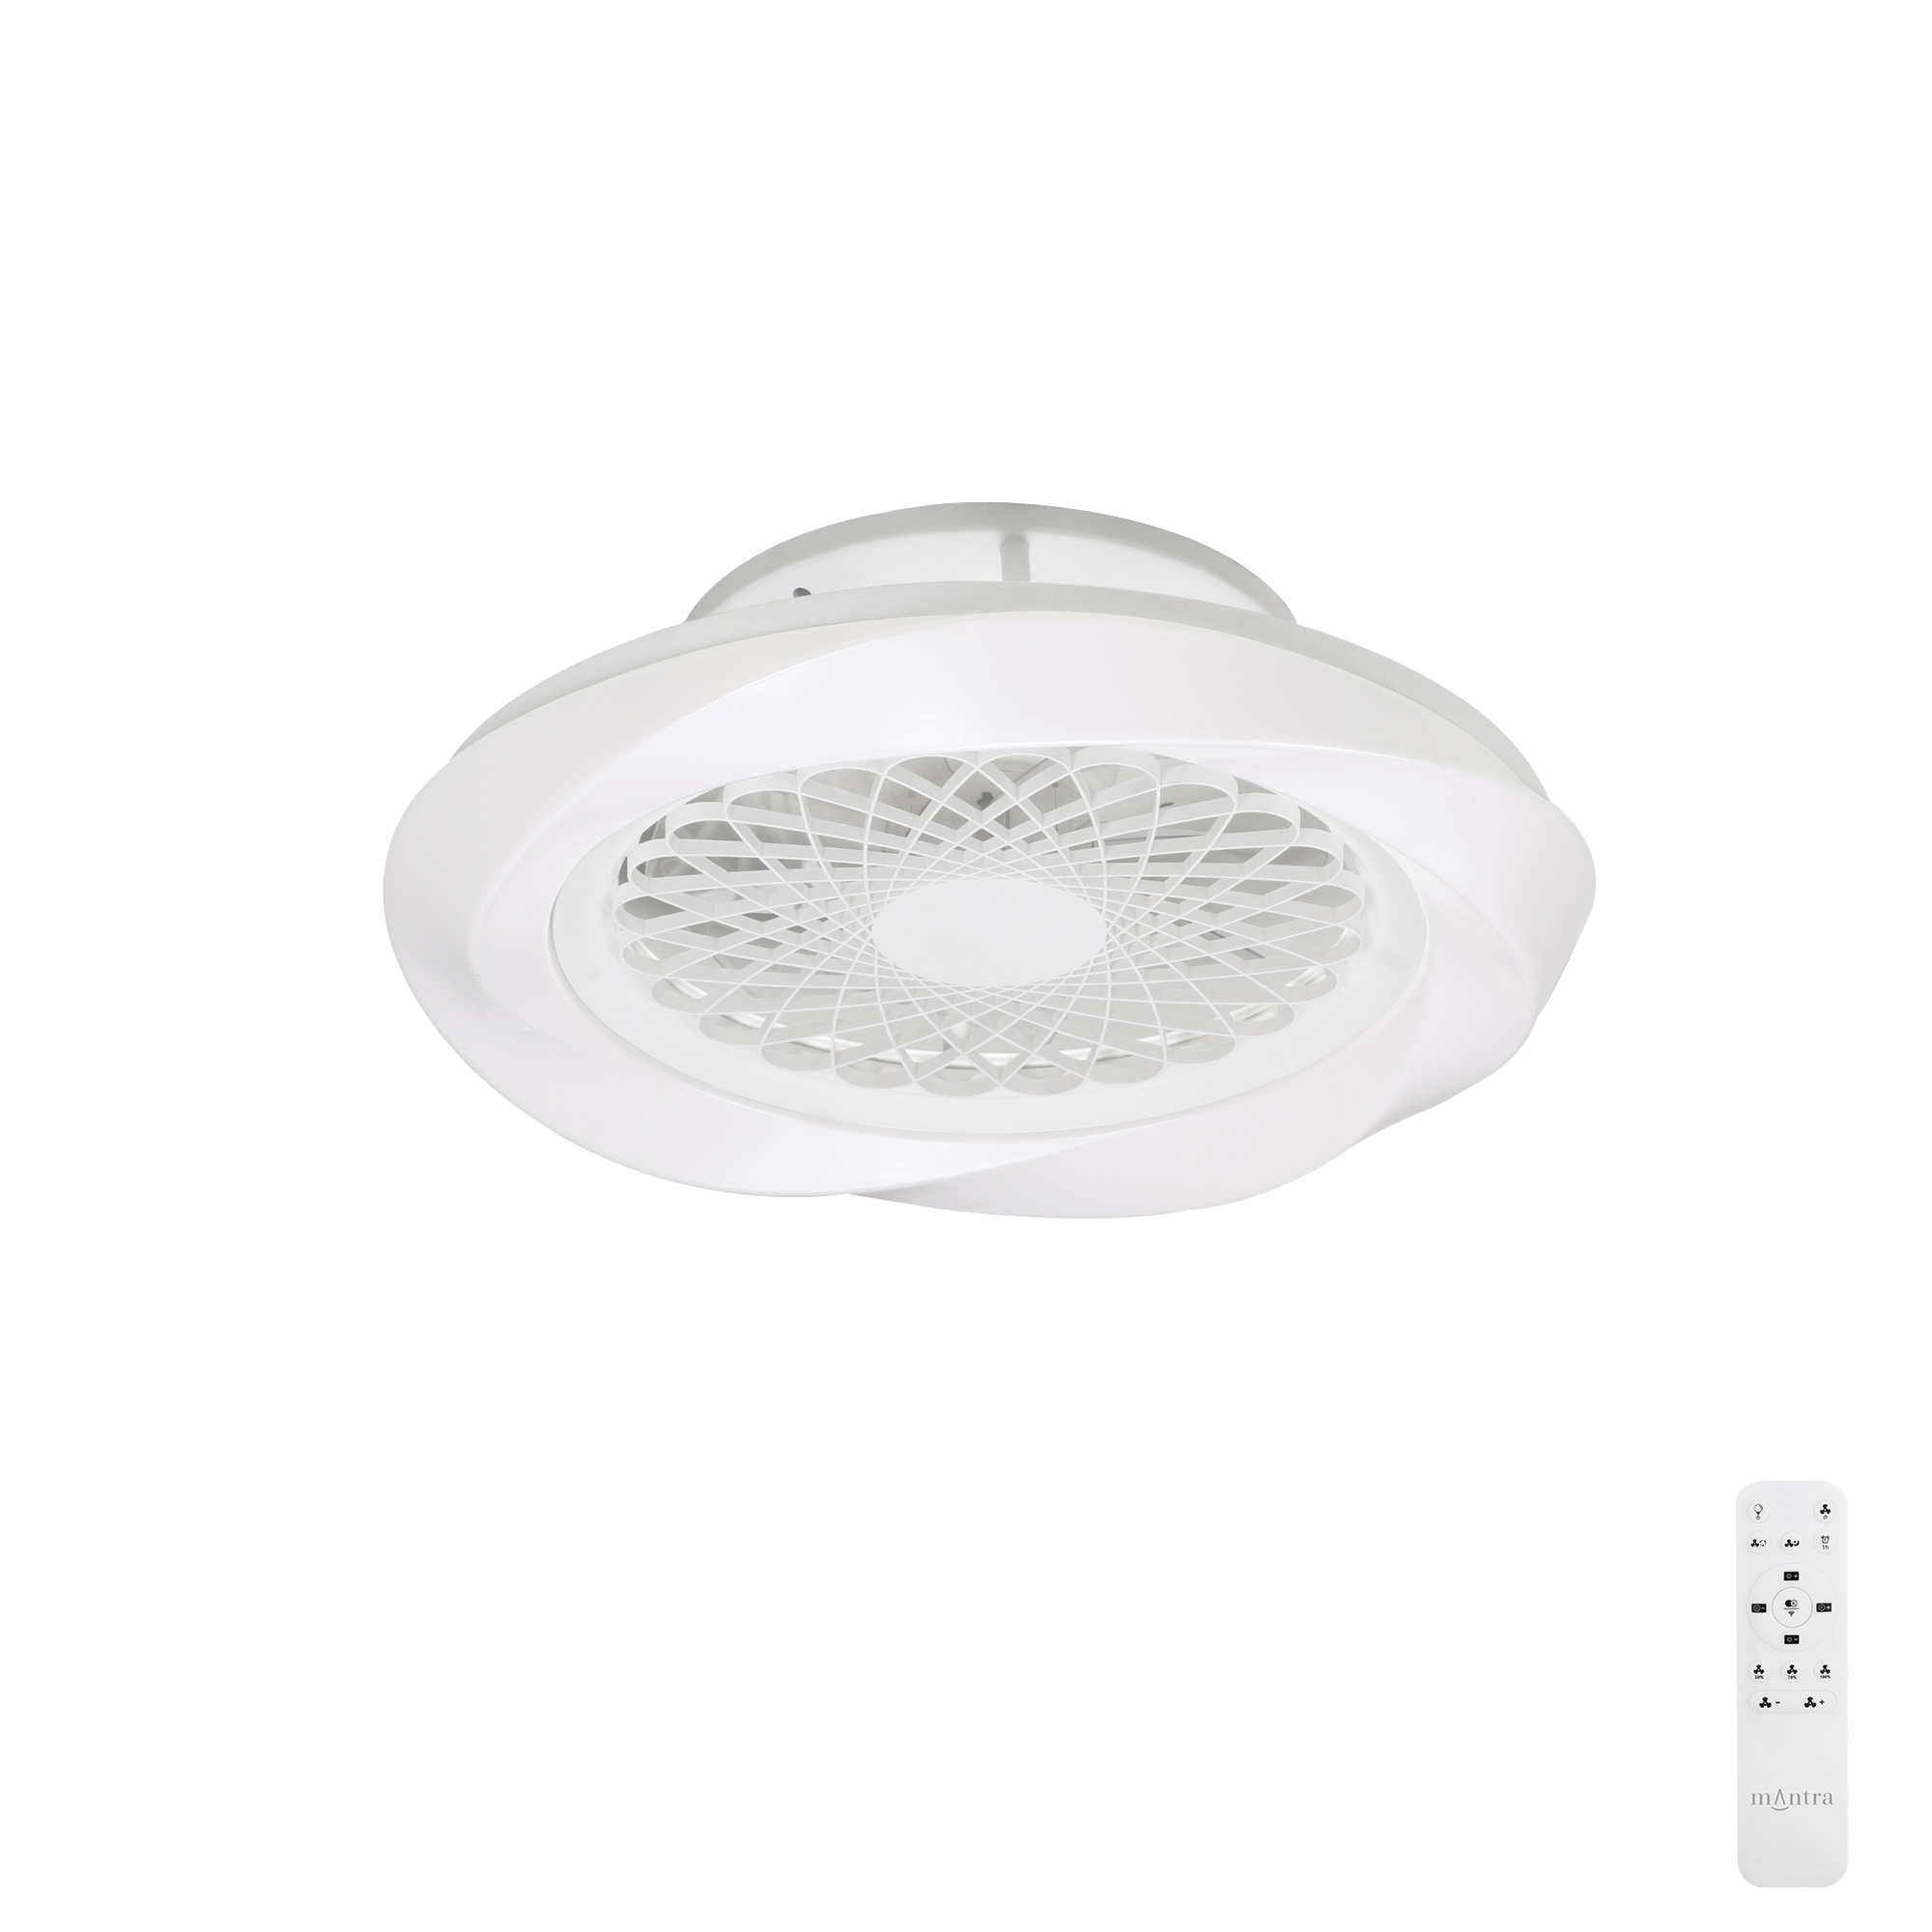 M7506  Boreal 70W LED Dimmable Ceiling Light & Fan, Remote Controlled White